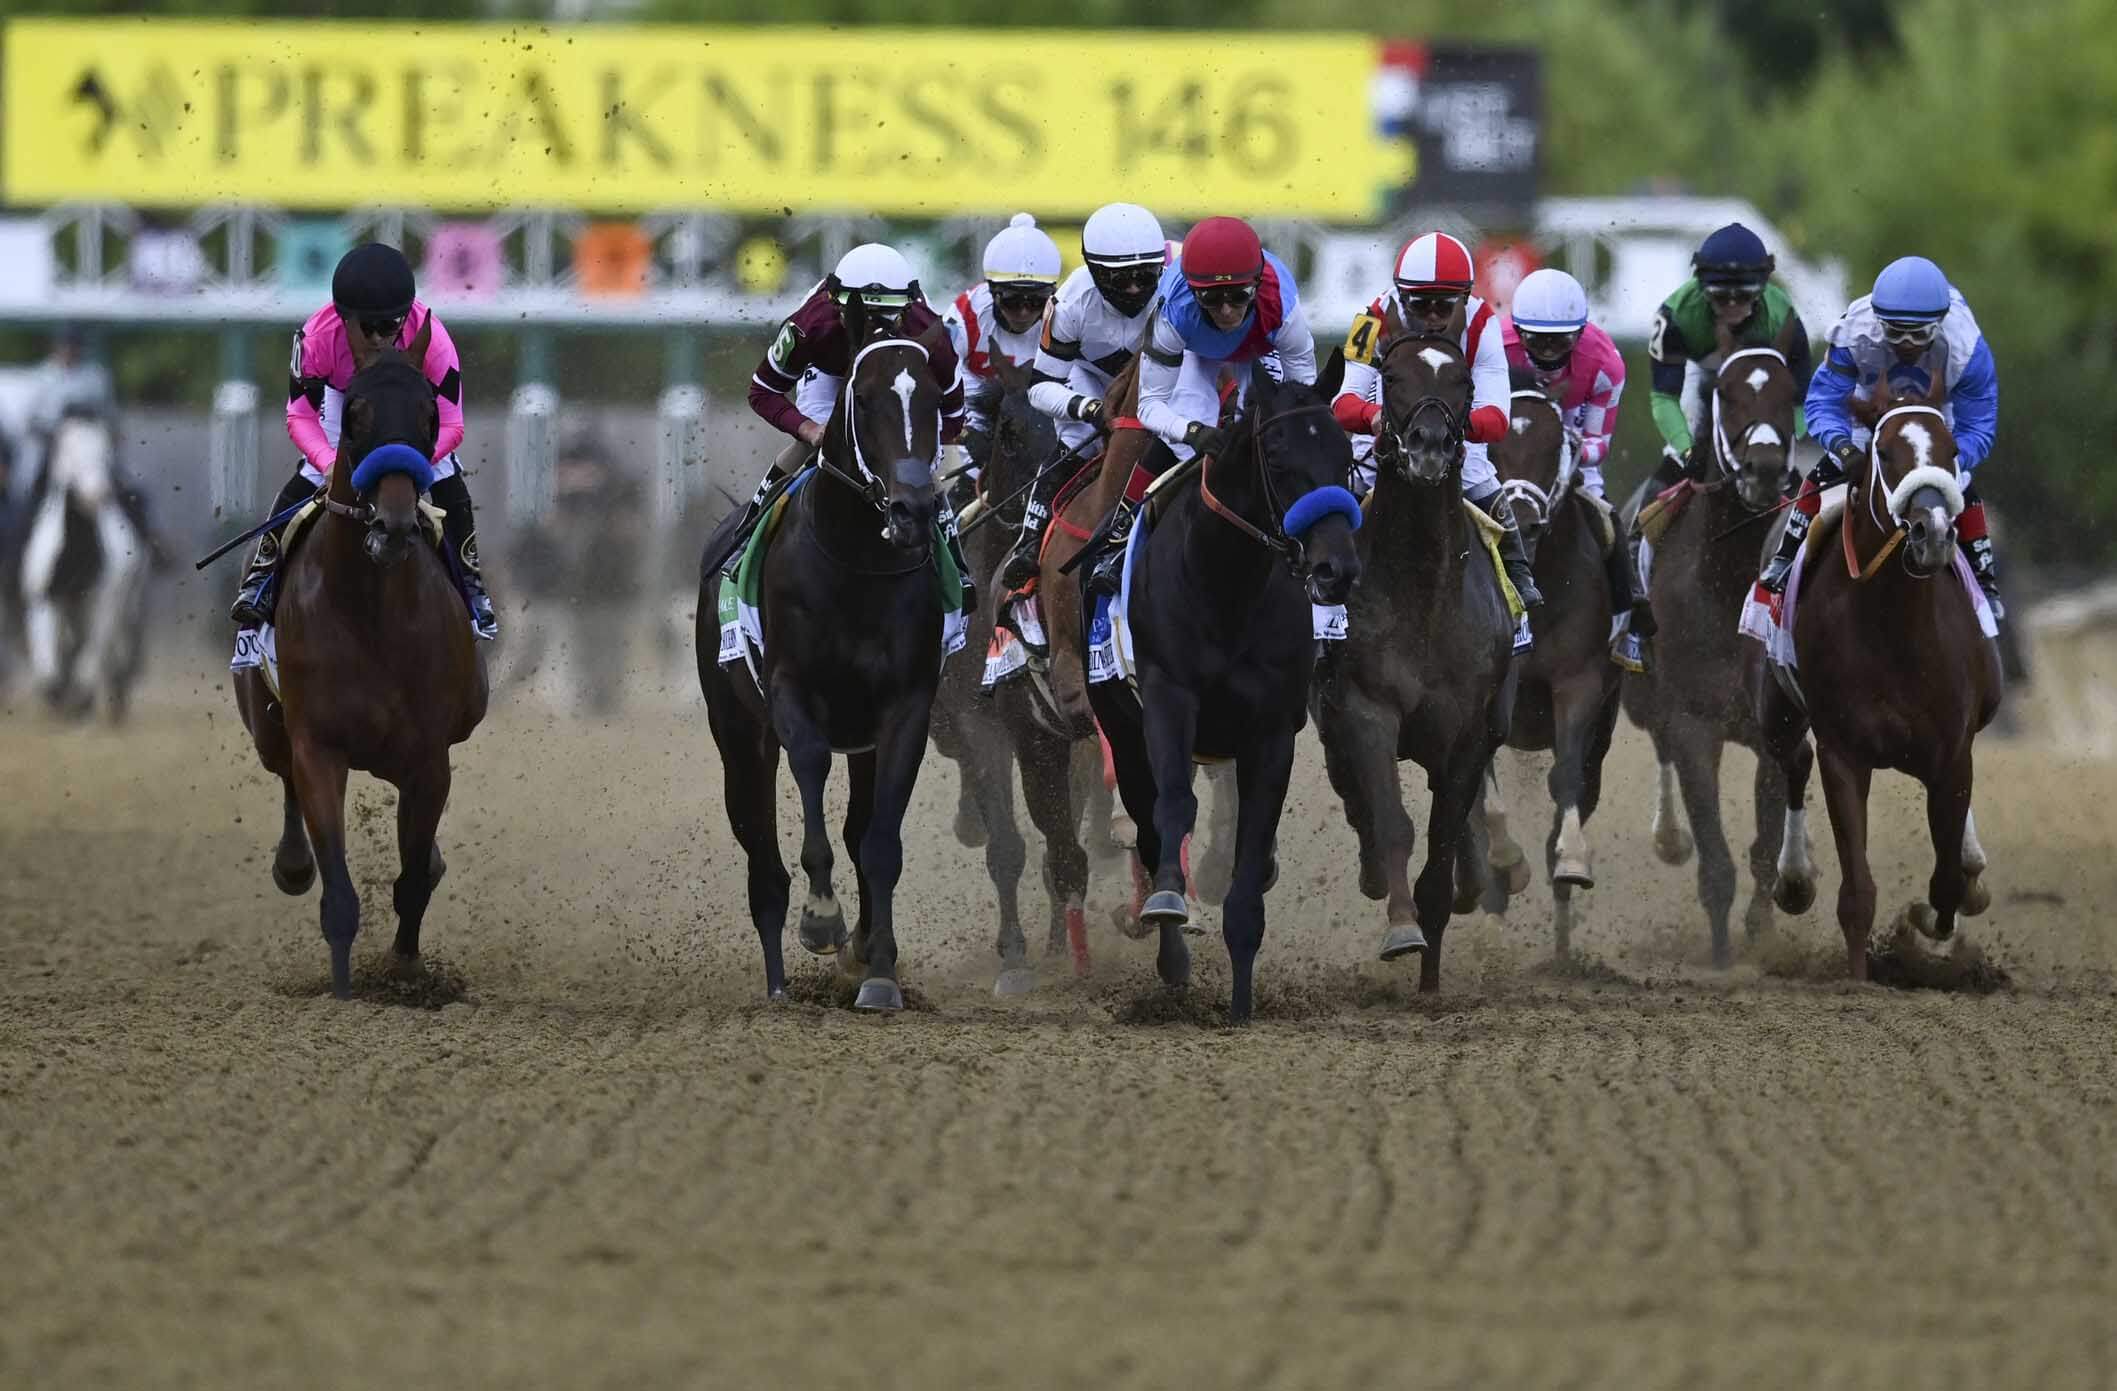 How To Bet - Preakness Stakes: Win, Place, Show & Trifecta Picks for 2022